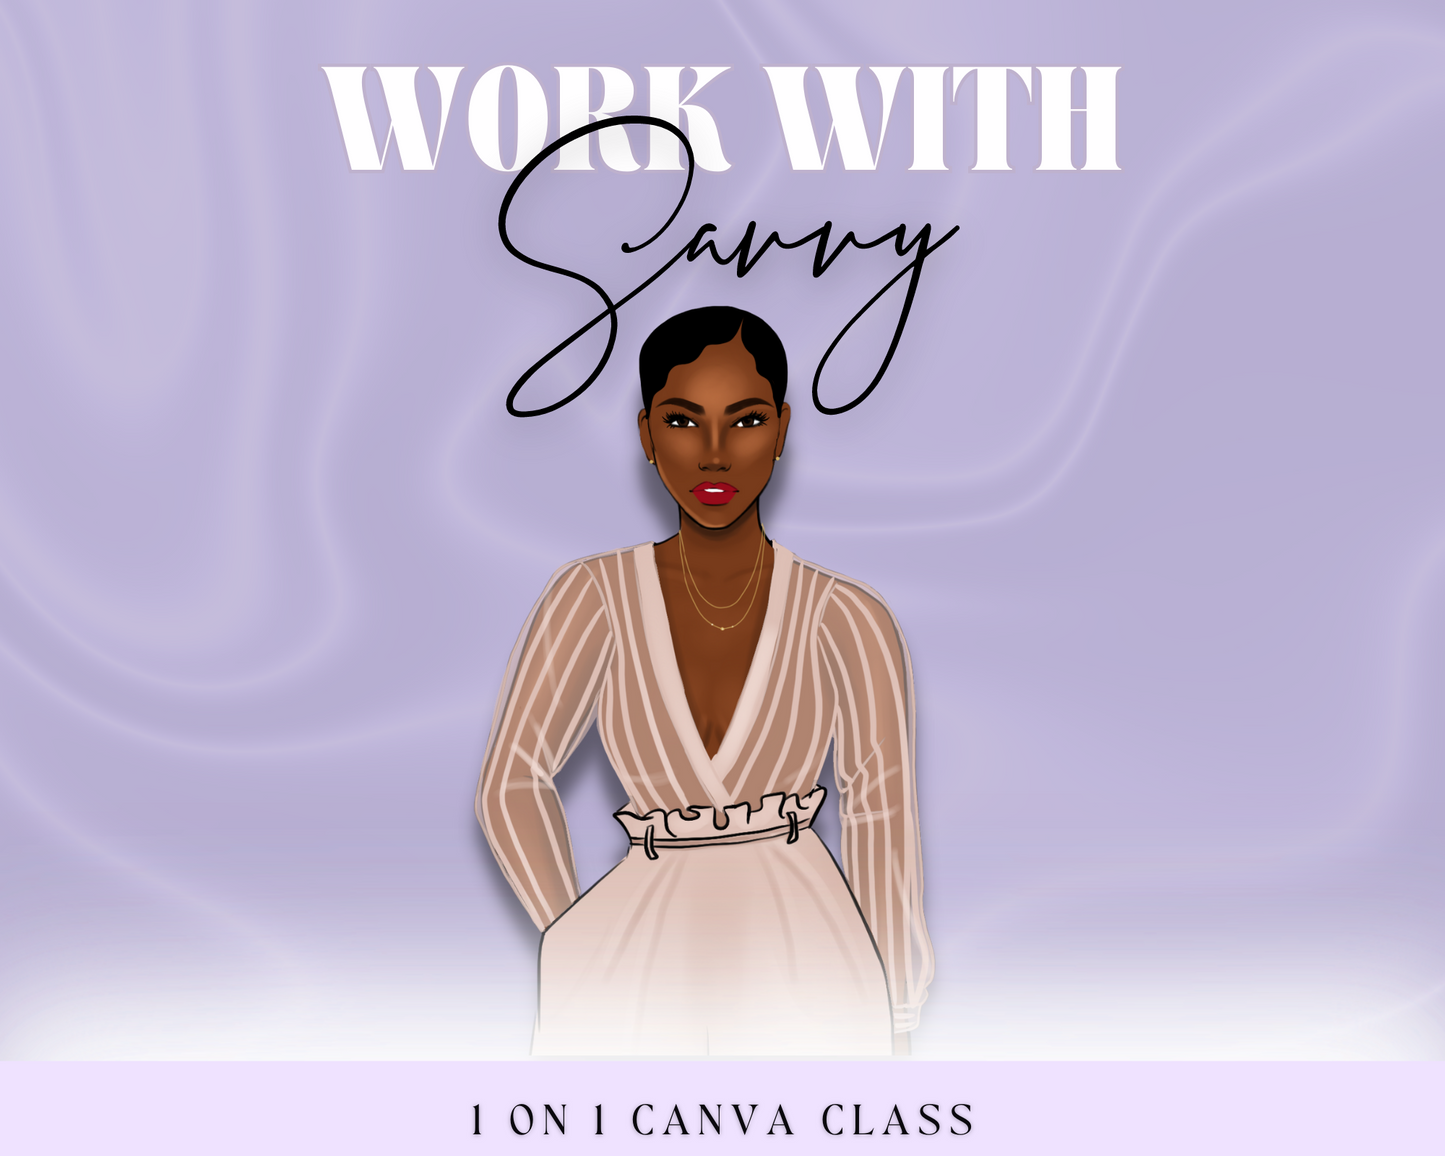 WORK WITH THE SAVVY PLANNING CHICK 1 ON 1 CANVA CLASS